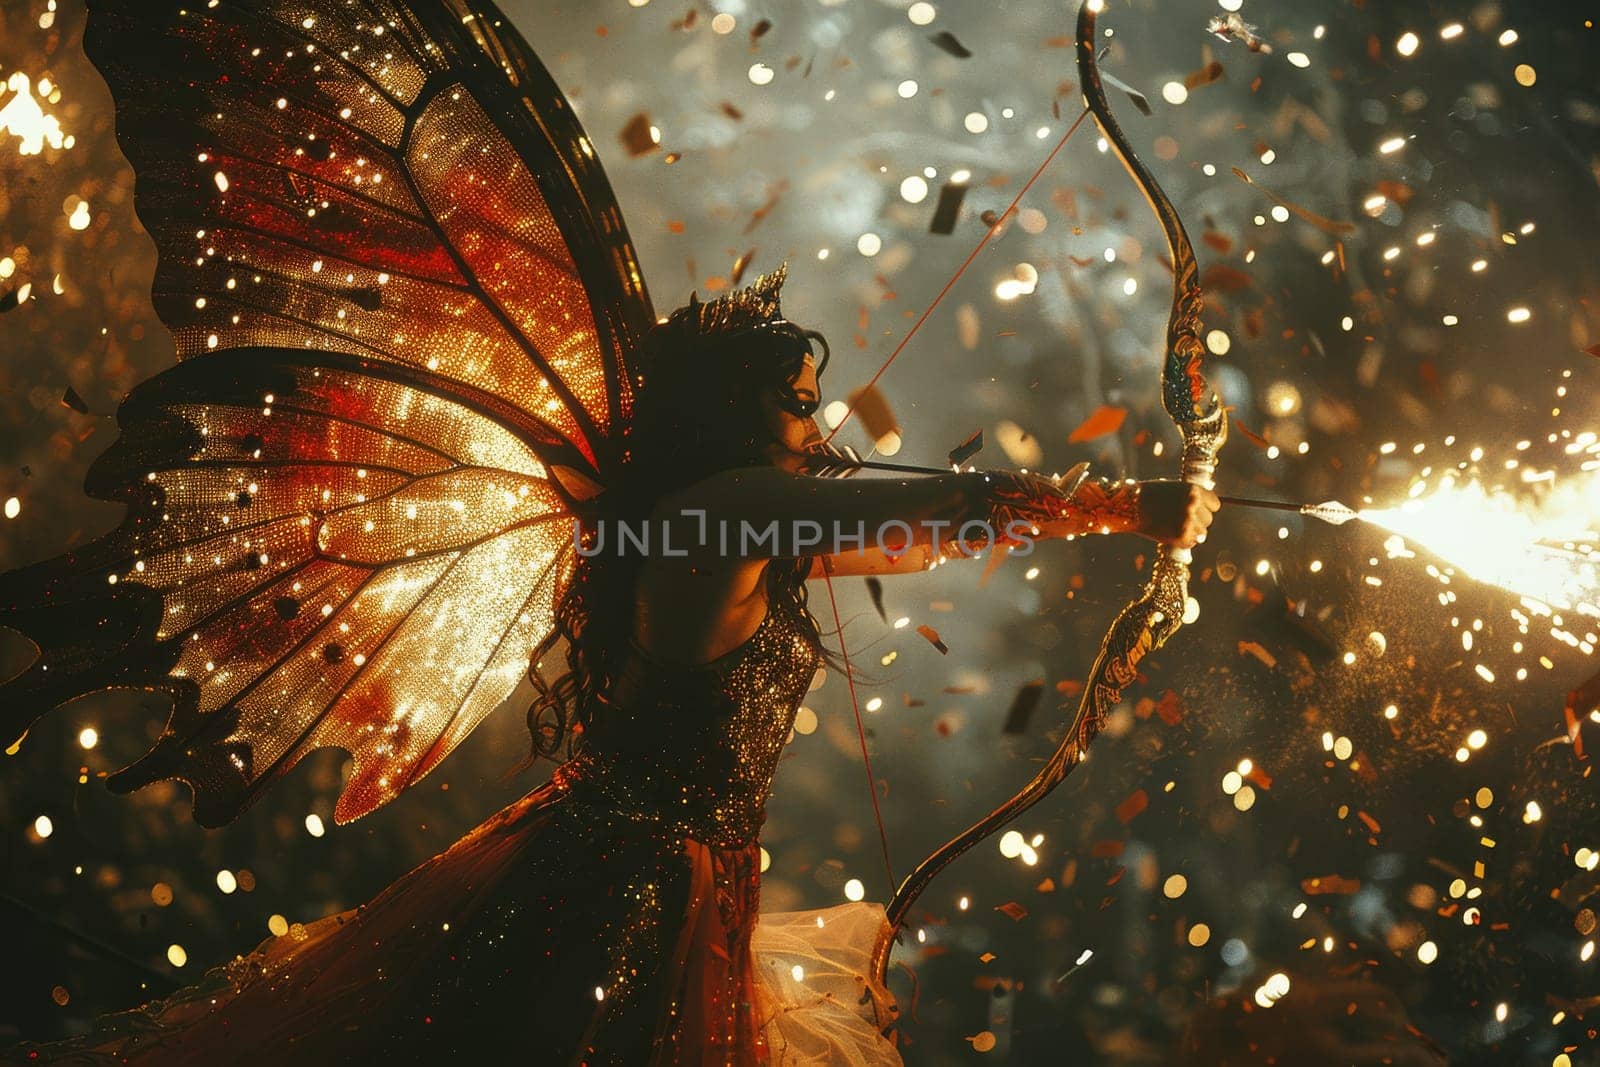 A woman dressed as a fairy is holding a bow and arrow. The scene is set in a dark, mysterious forest with a lot of glitter and confetti